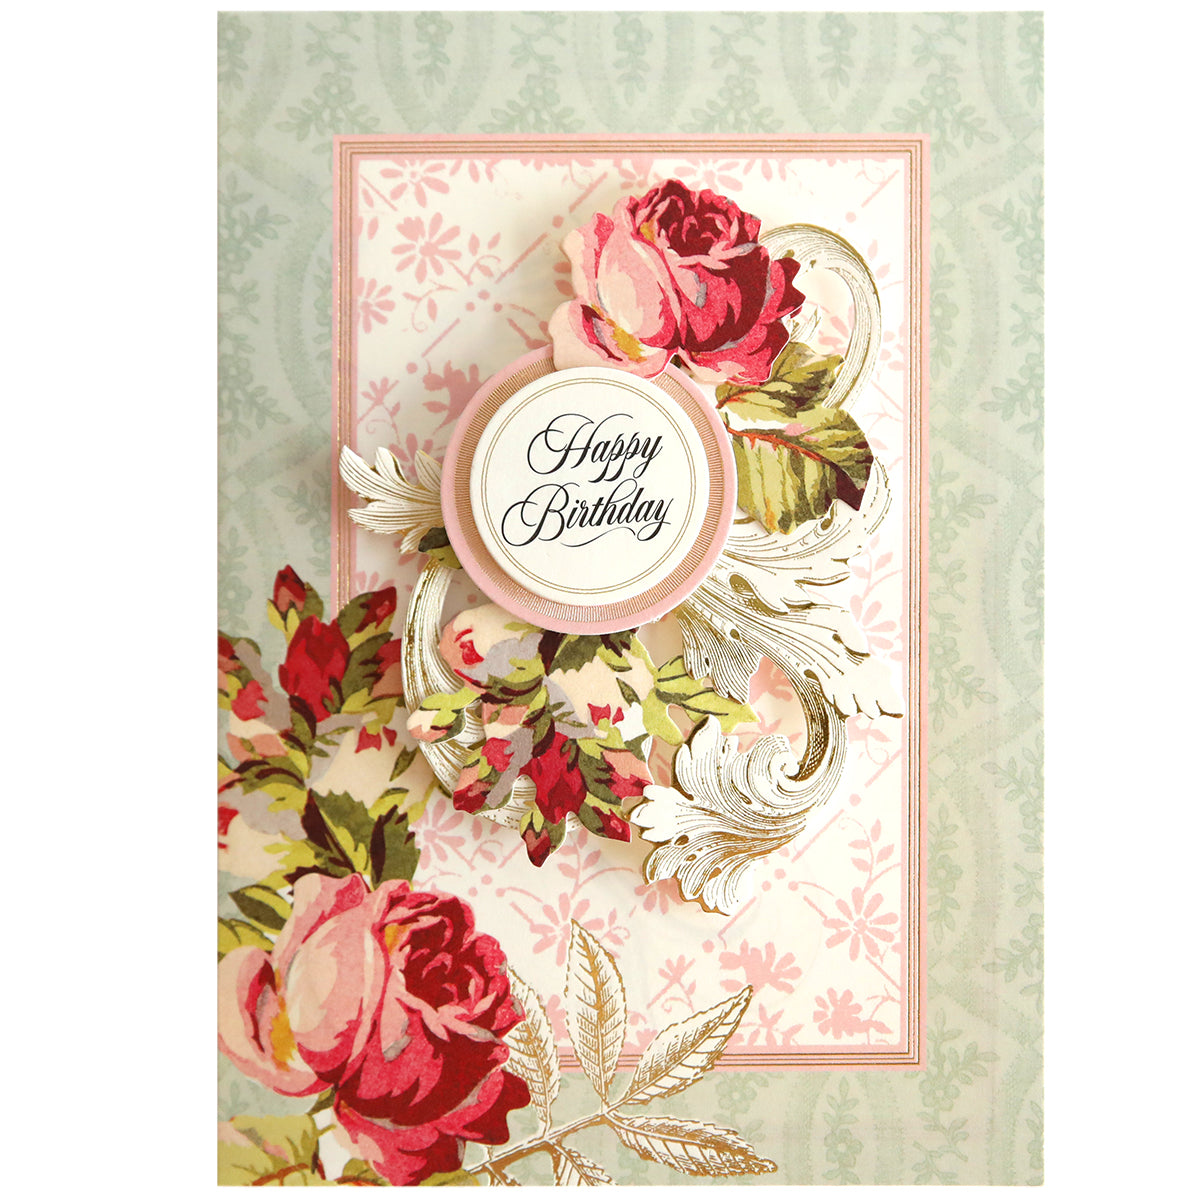 A handmade birthday card from the Folded Flower Birthday Card Kit, featuring floral designs and a central circle with "happy birthday" text, embellished with metallic accents.